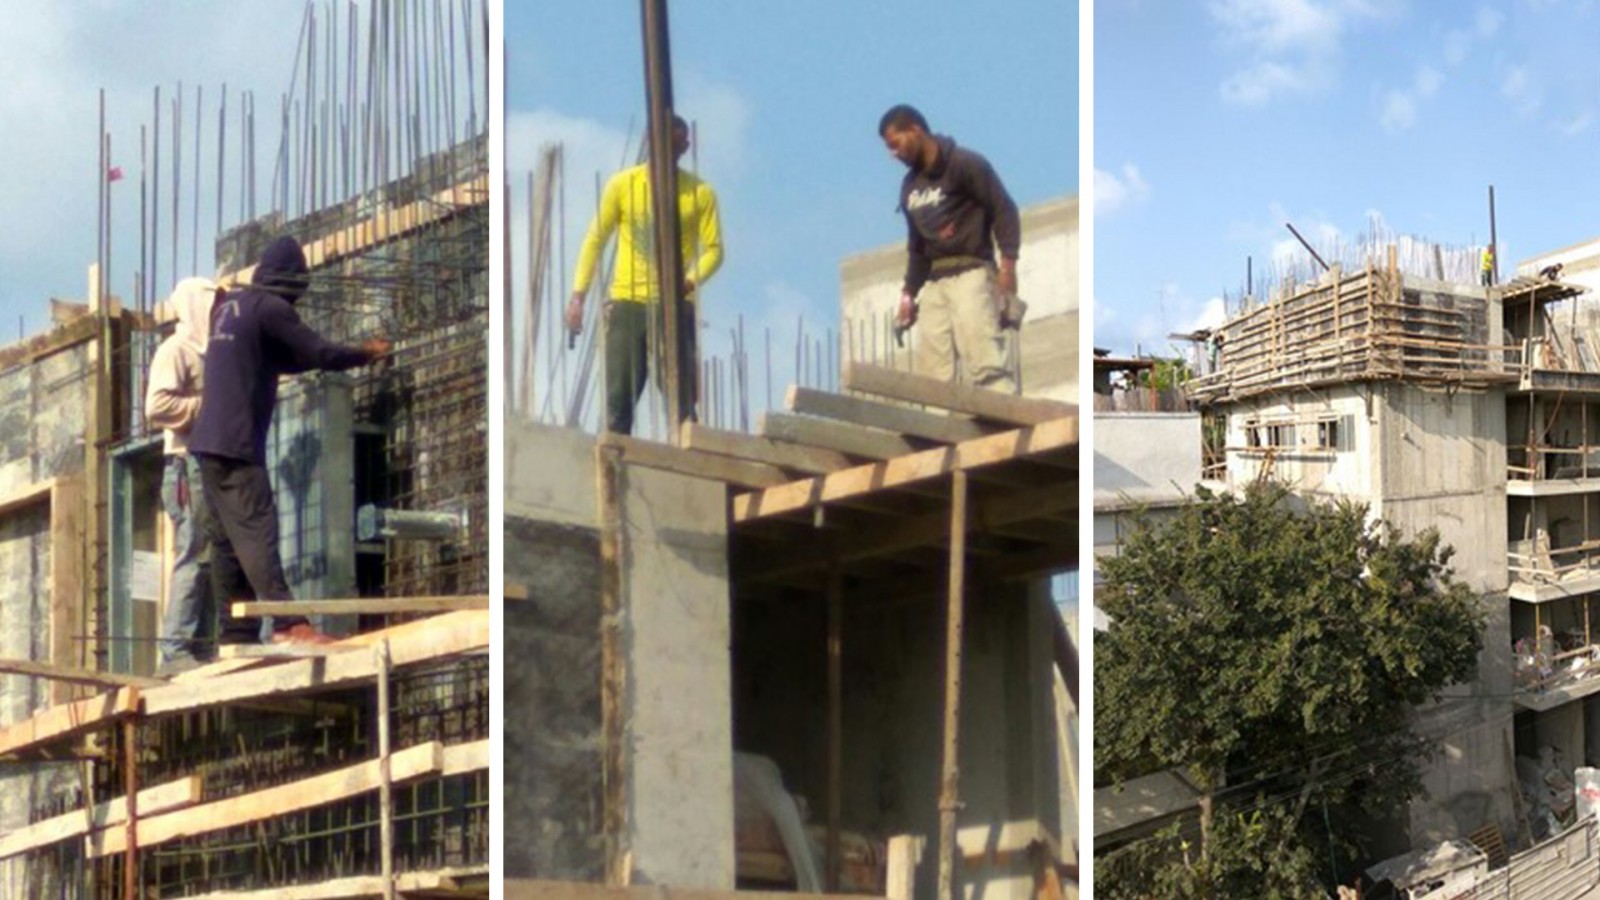 Workplace safety violations continually repeated at construction site in Israel’s Center (Photograph: Davar).